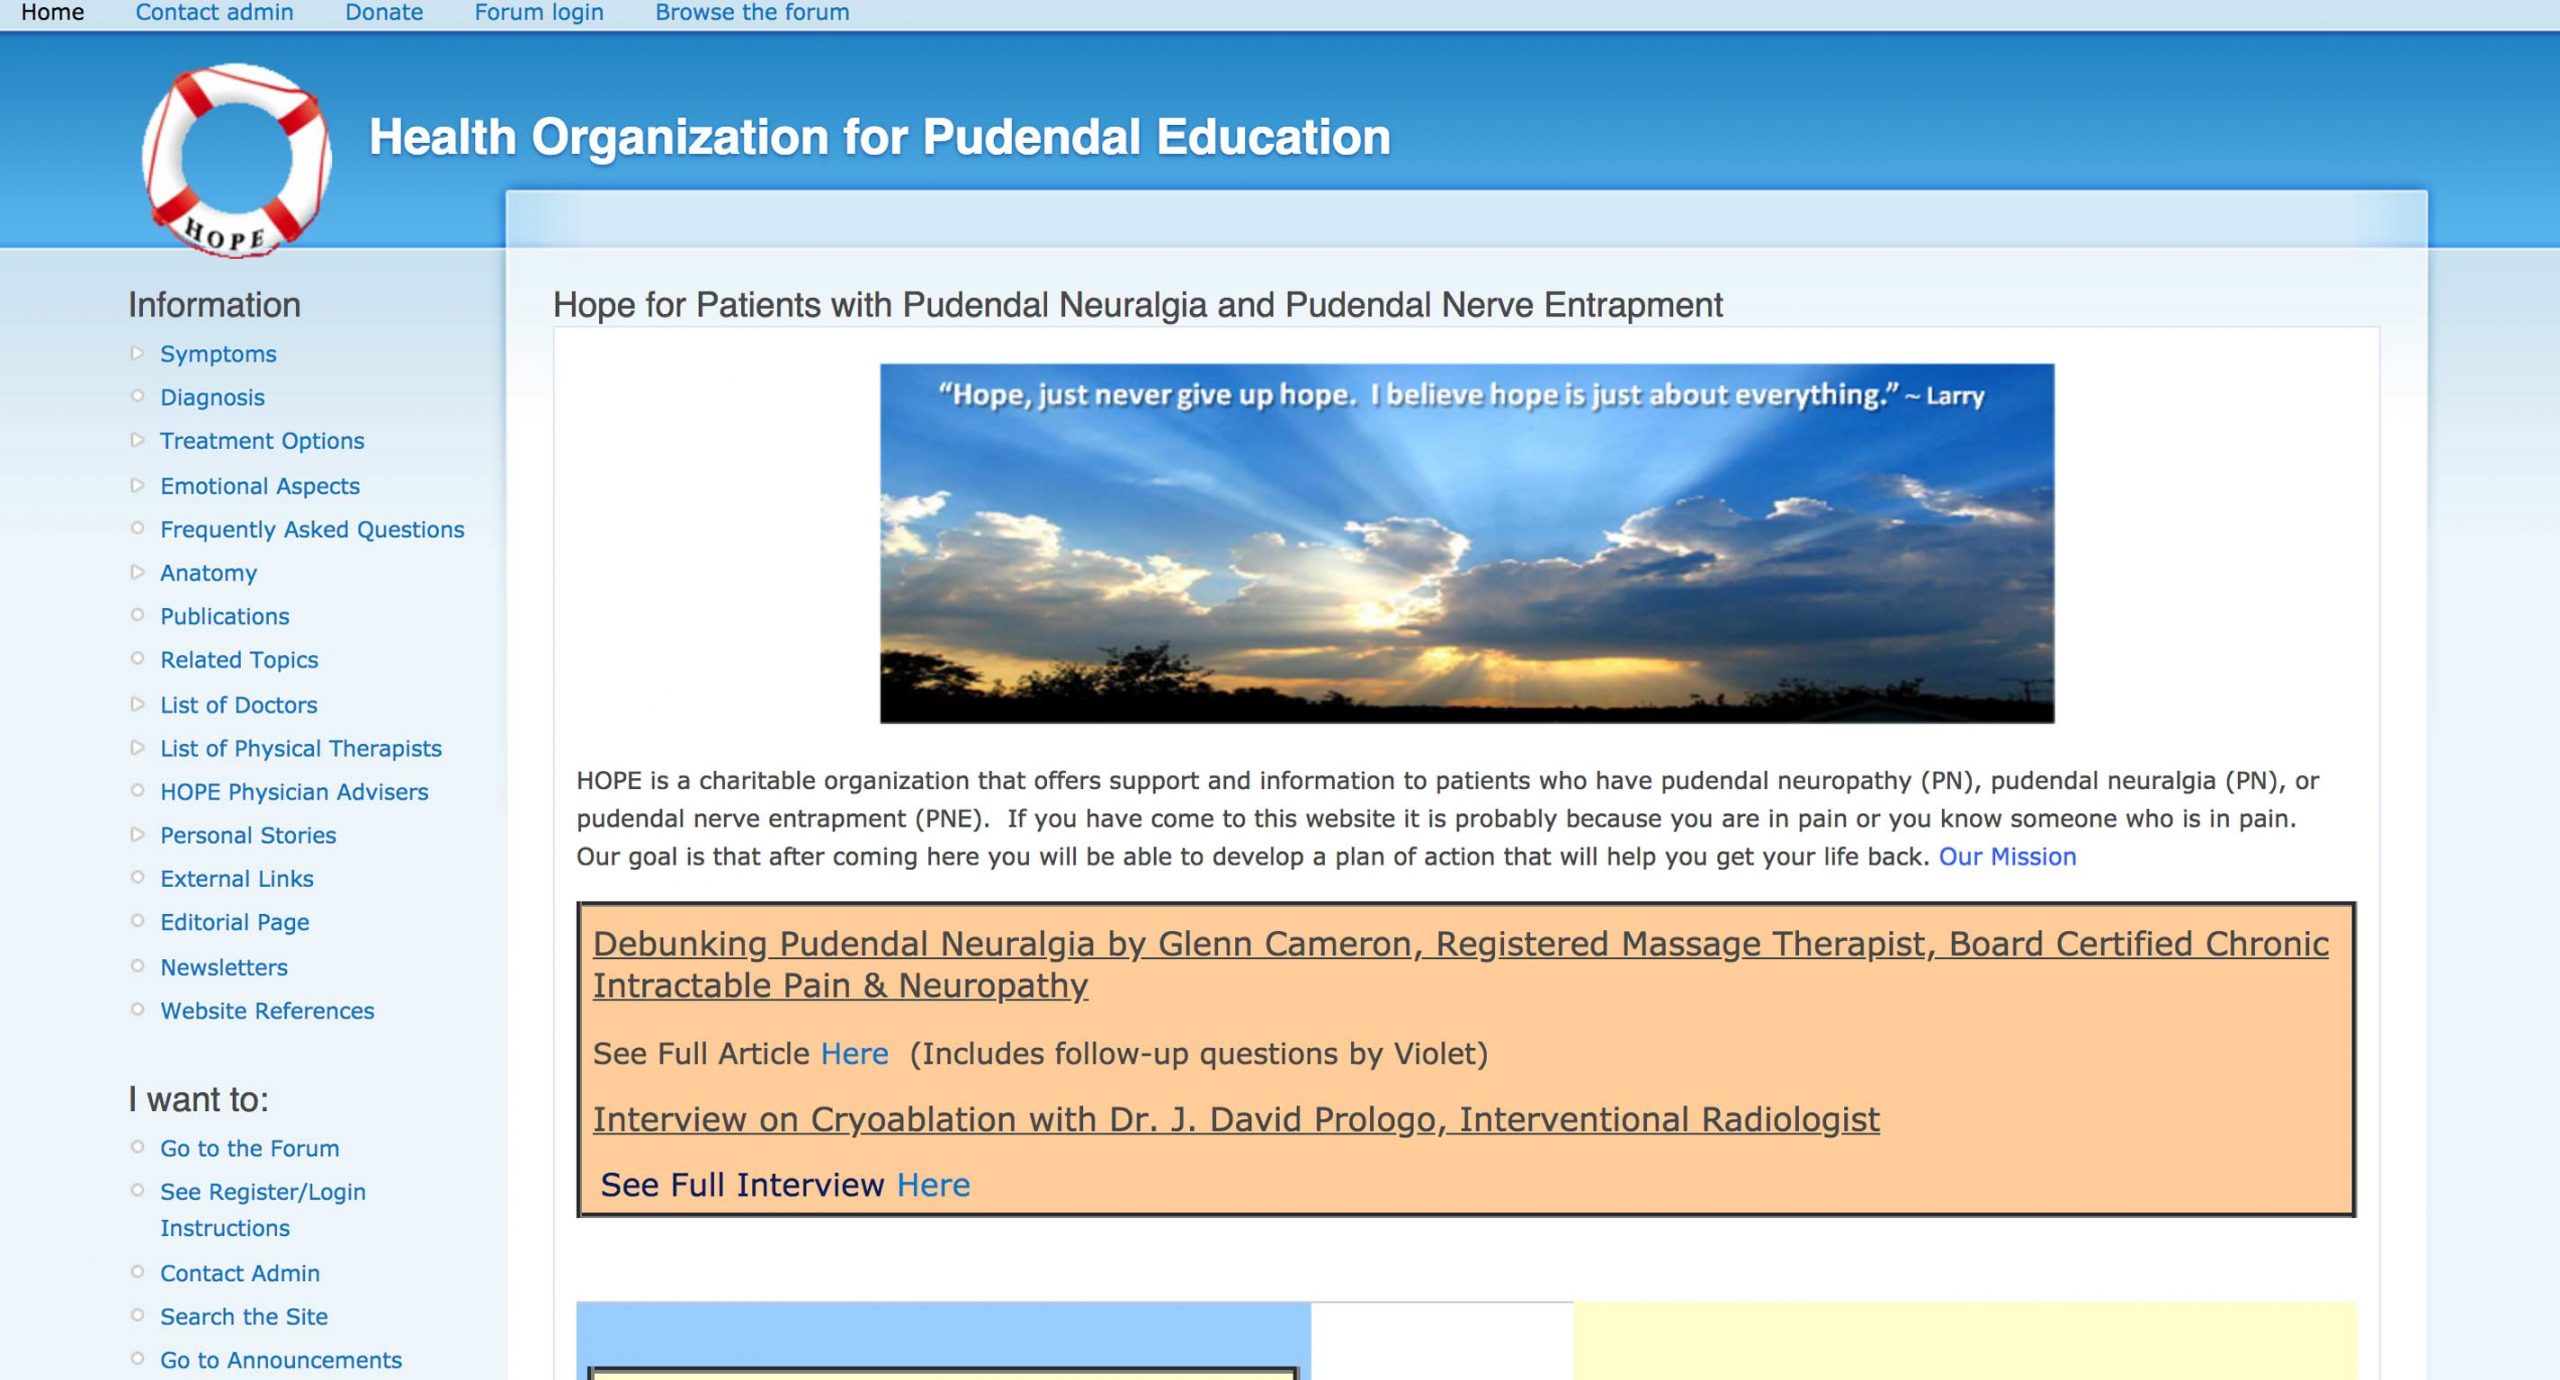 HOPE - Health Organization for Pudendal Education - Home Page